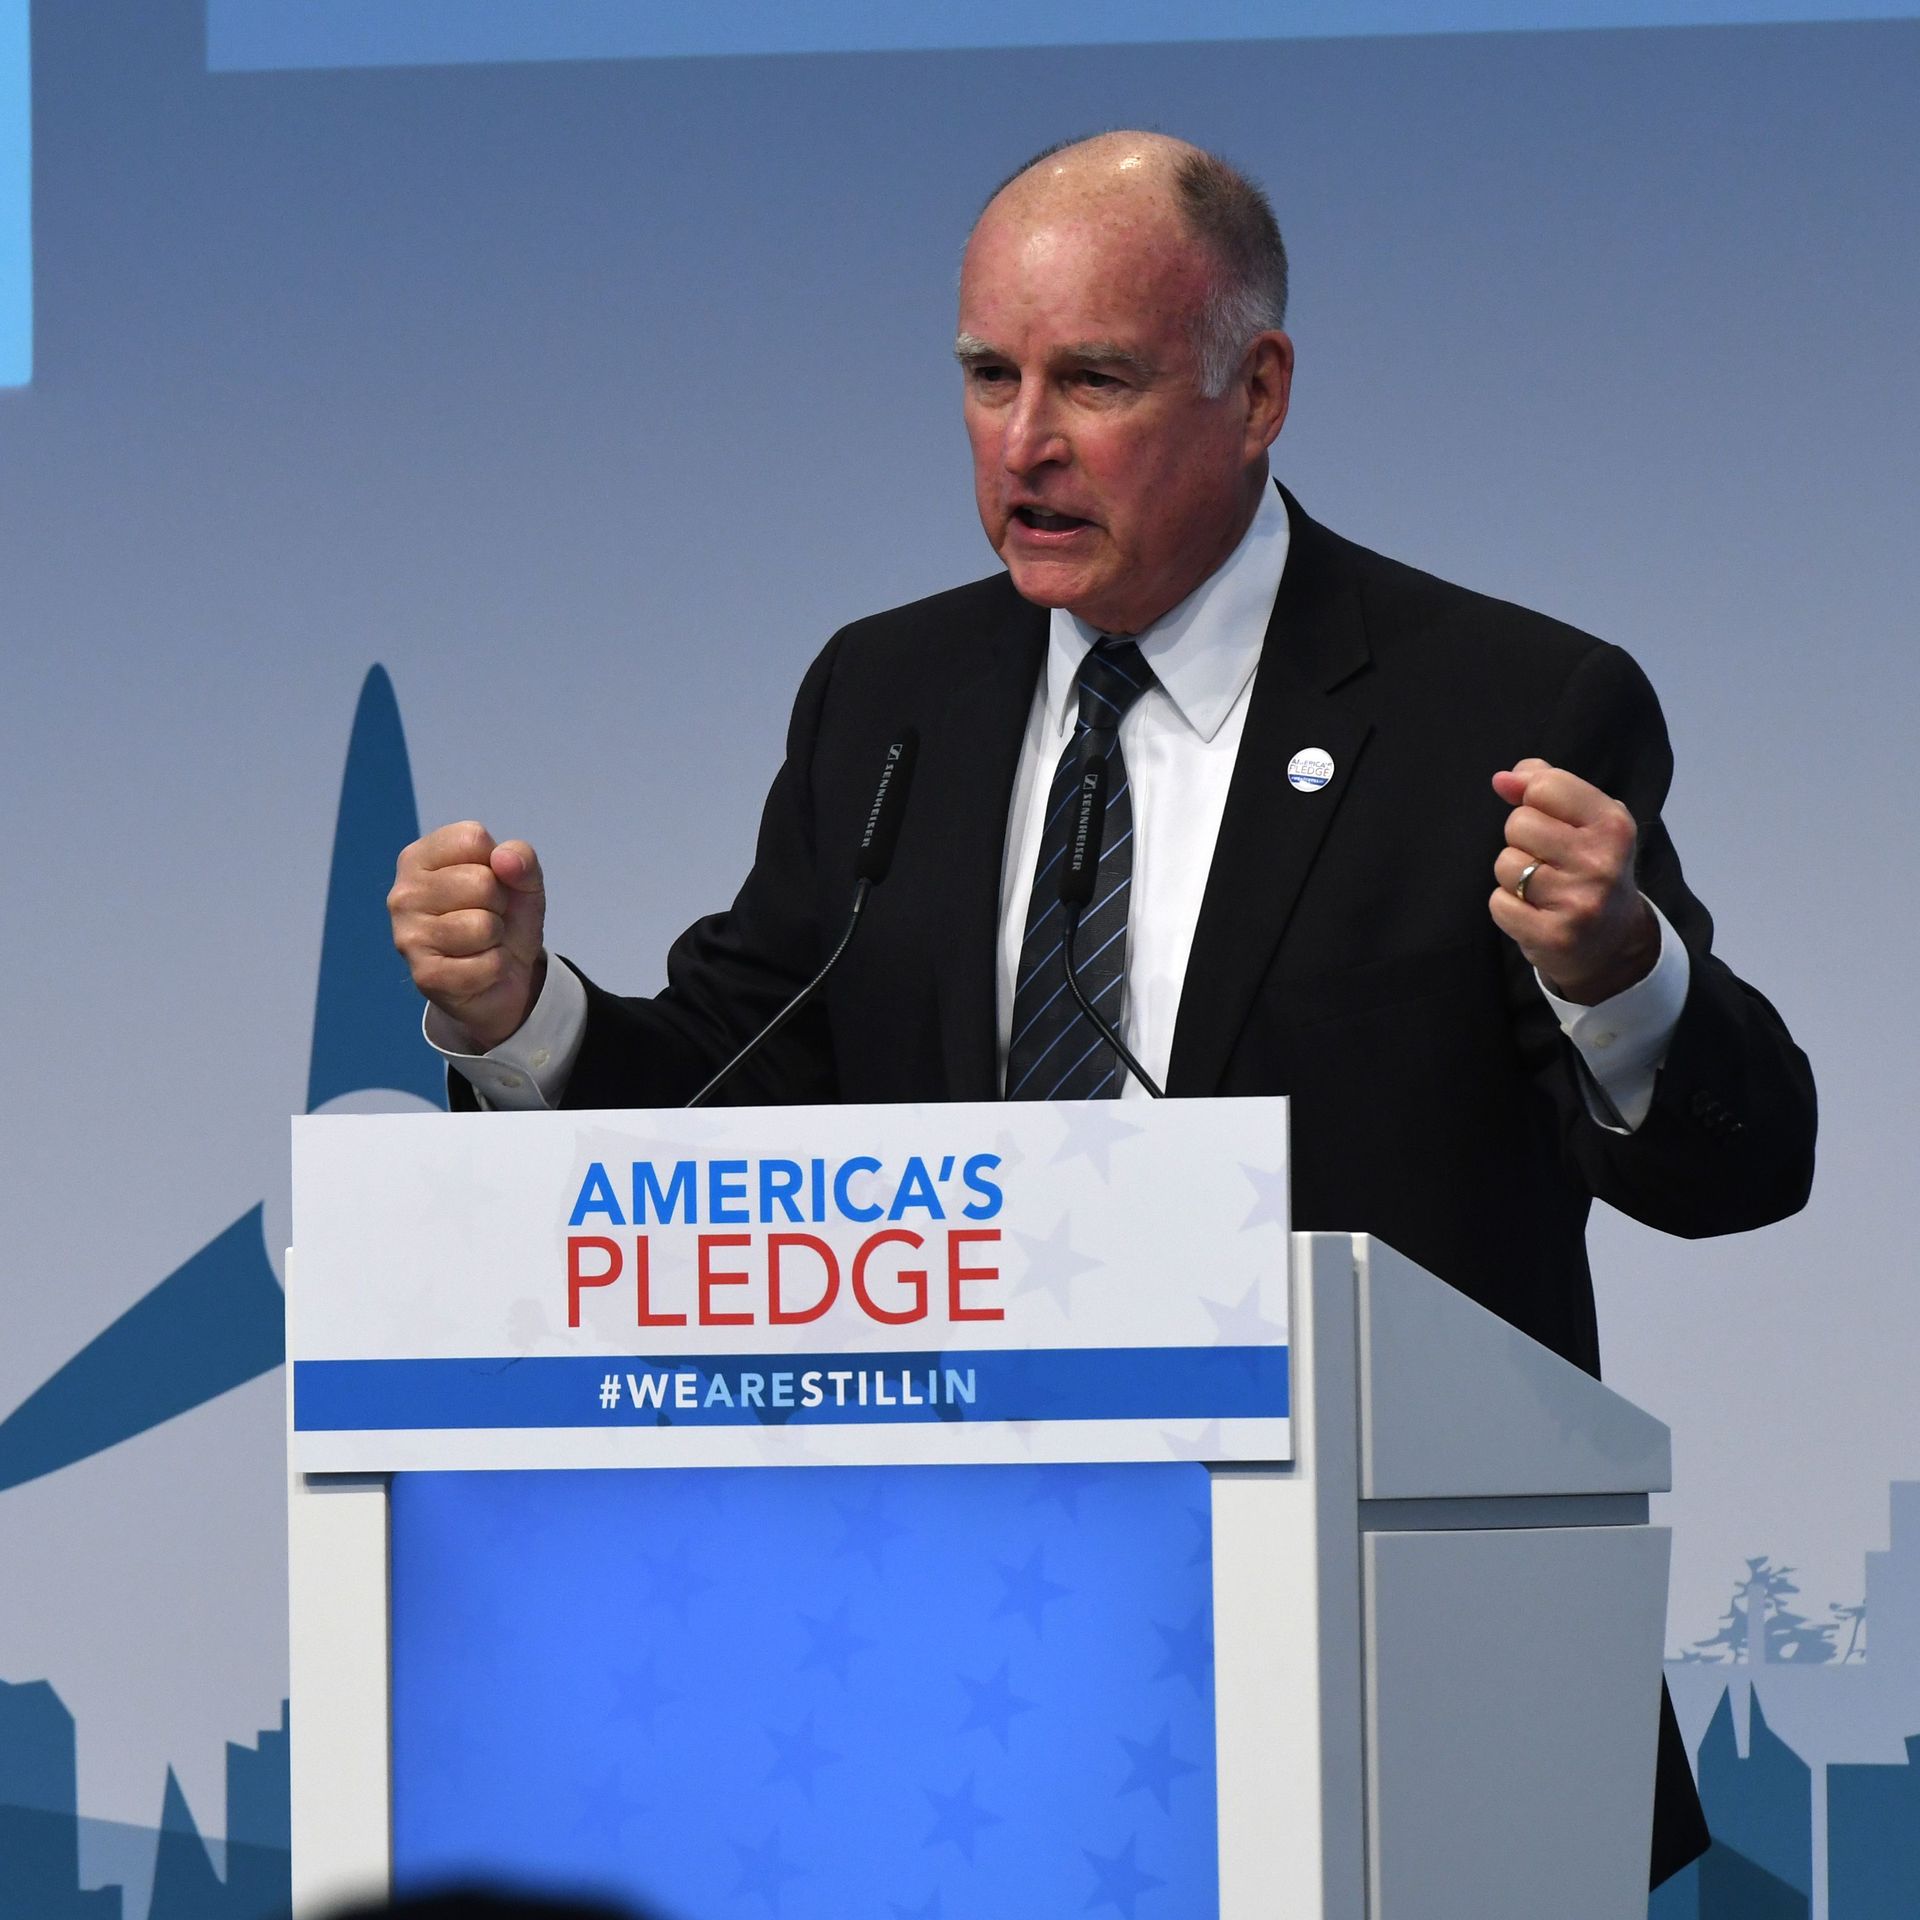 US Governor of California, Jerry Brown speaks at the launch event at the US climate action center on November 11, 2017 during the COP23 United Nations Climate Change Conference.